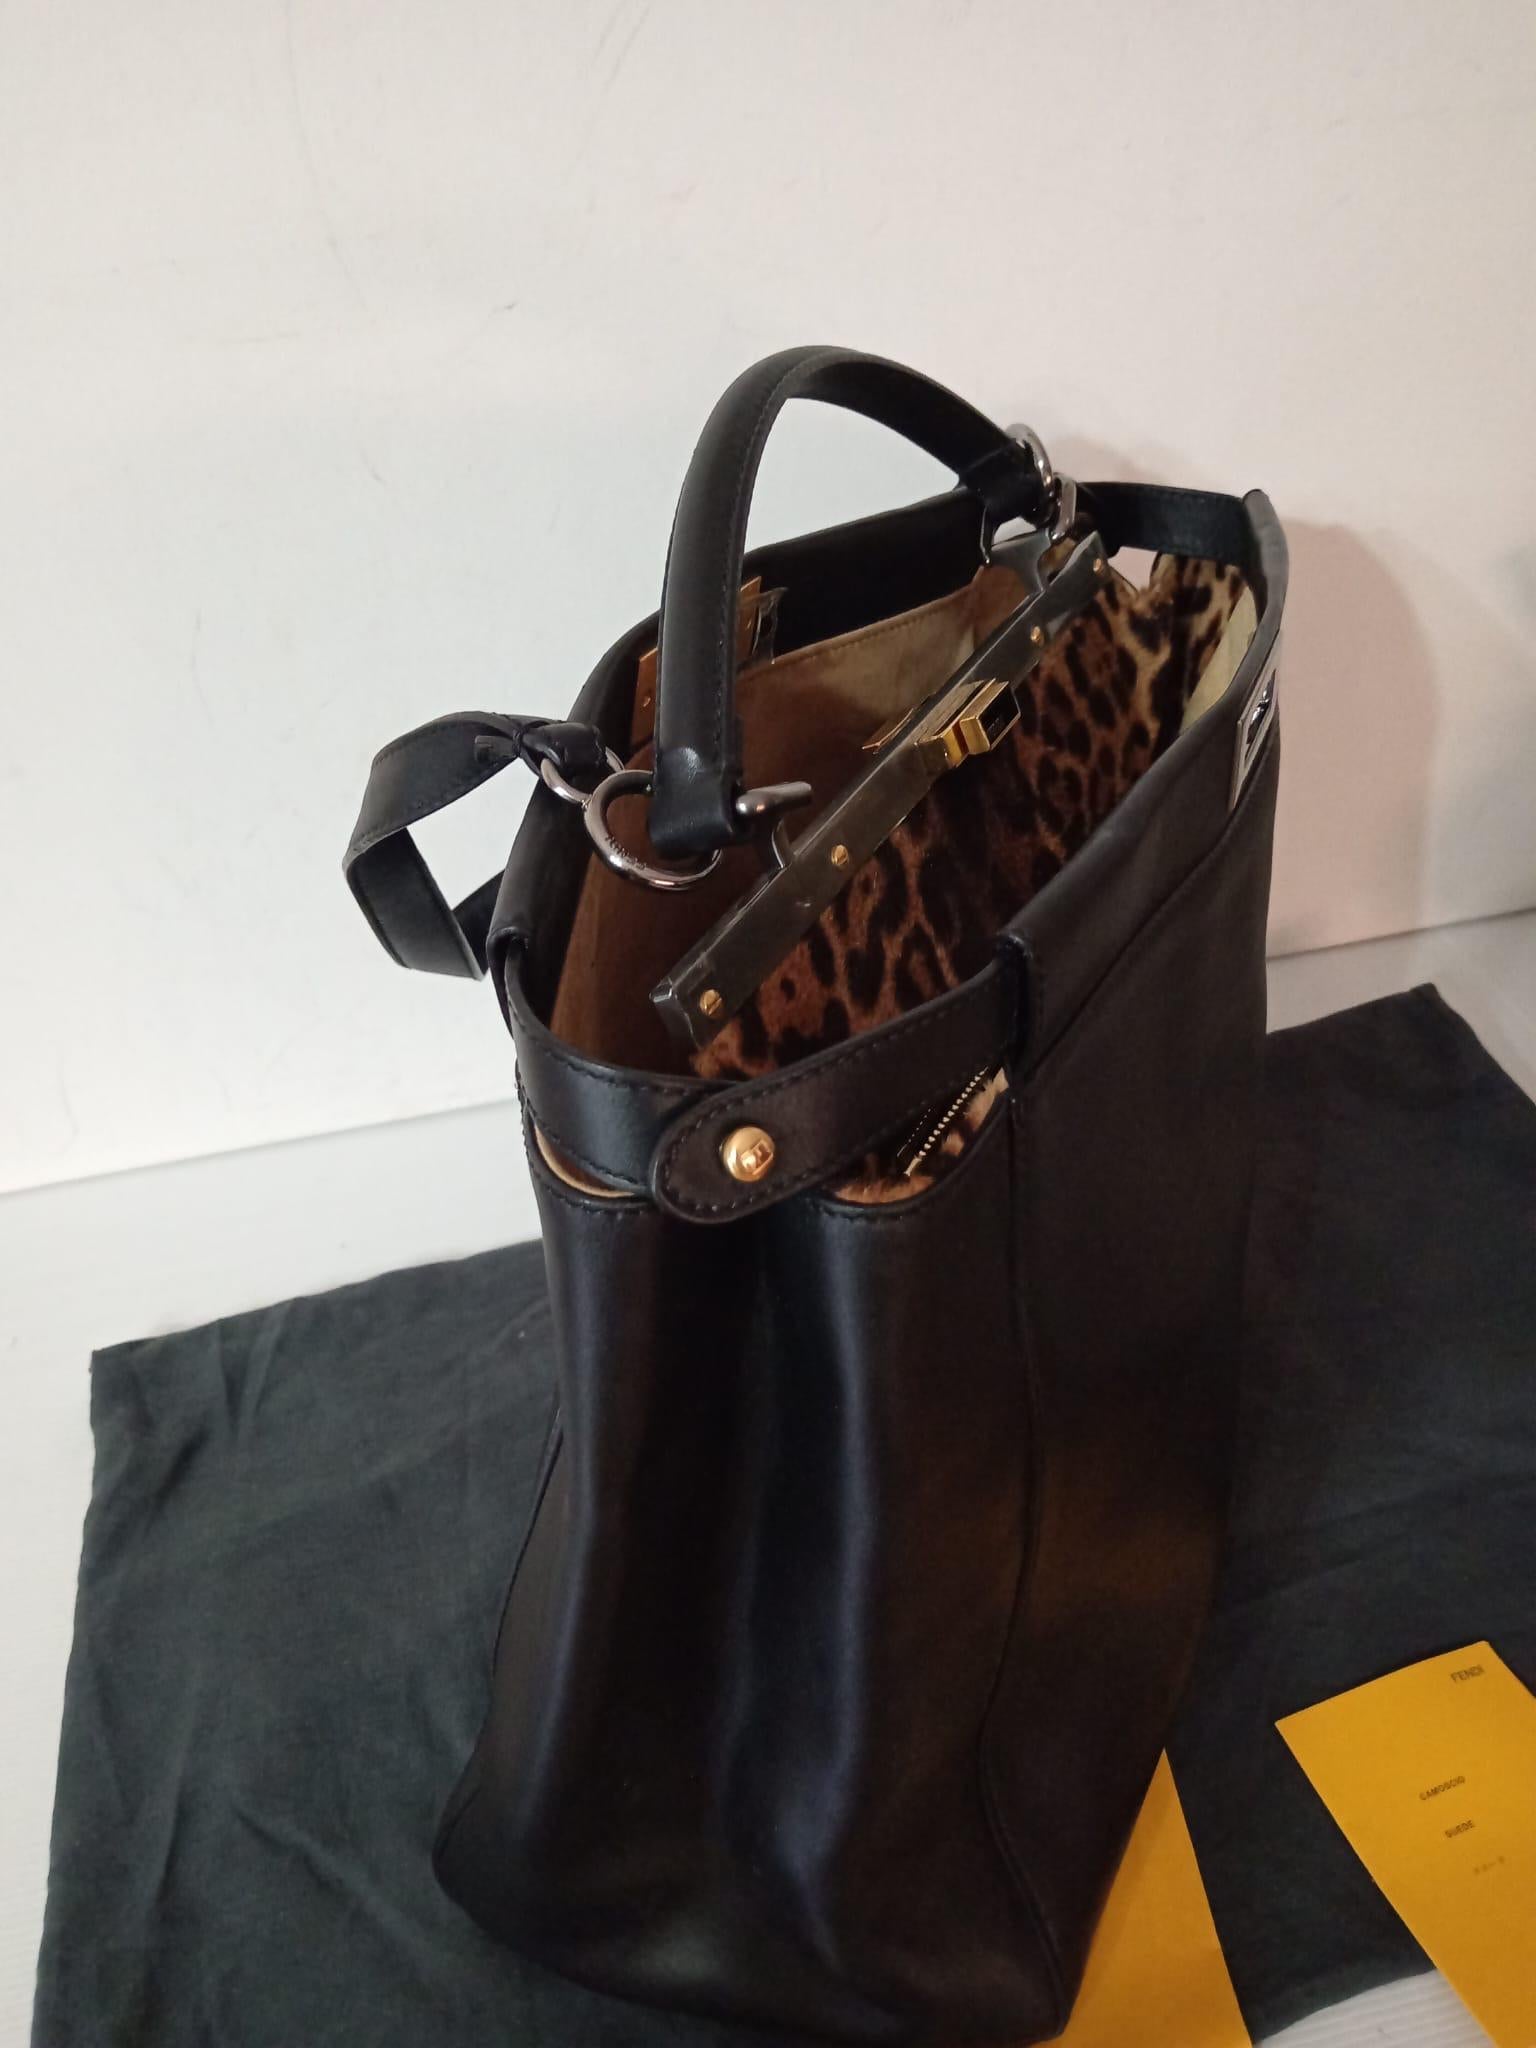 Fendi Peekaboo bag with pony skin interior in excellent condition For Sale 1